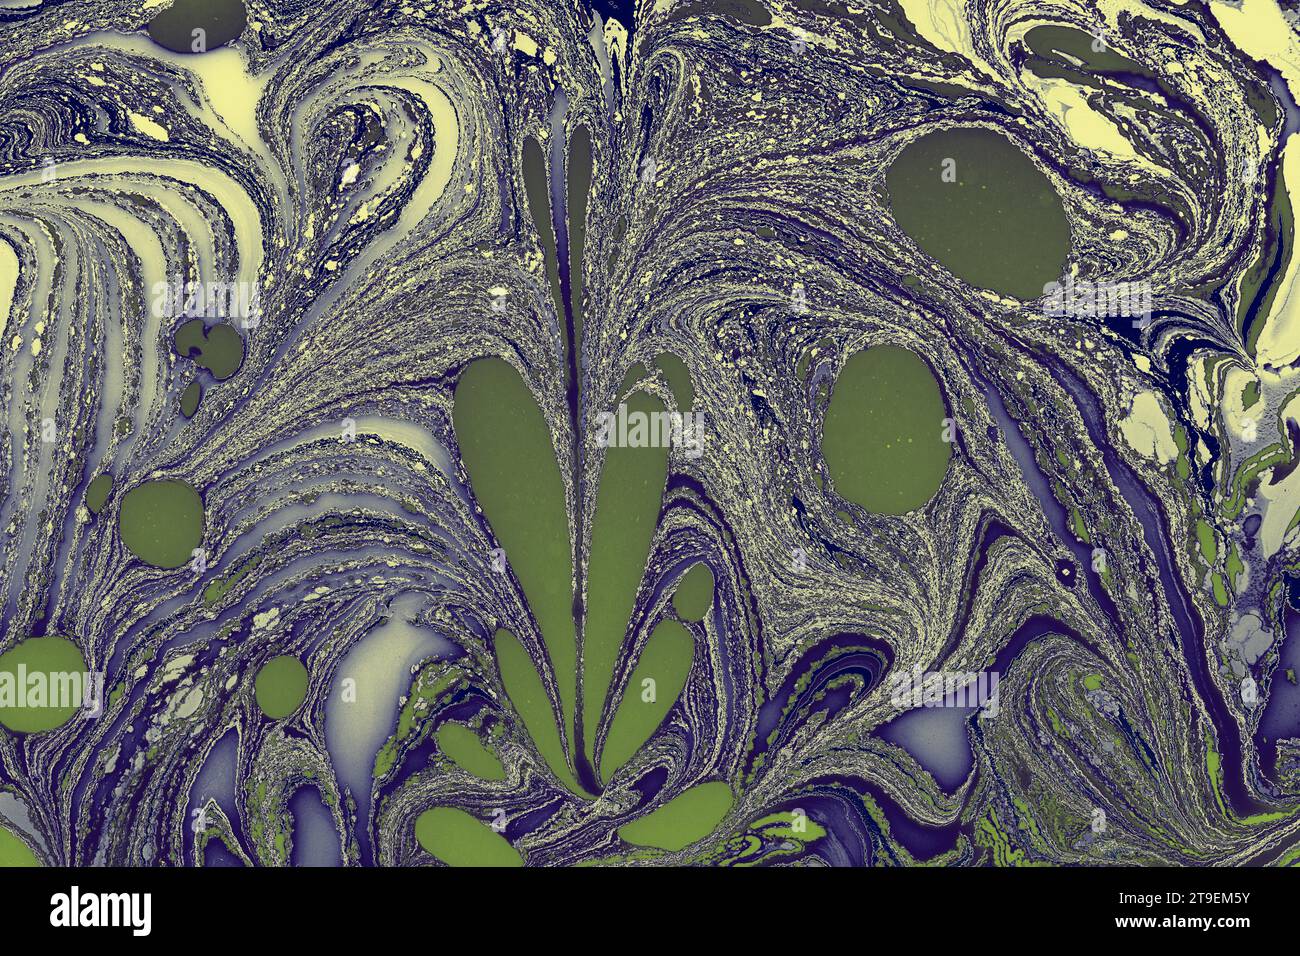 Abstract marbling floral pattern for fabric, tile design. background texture Stock Photo